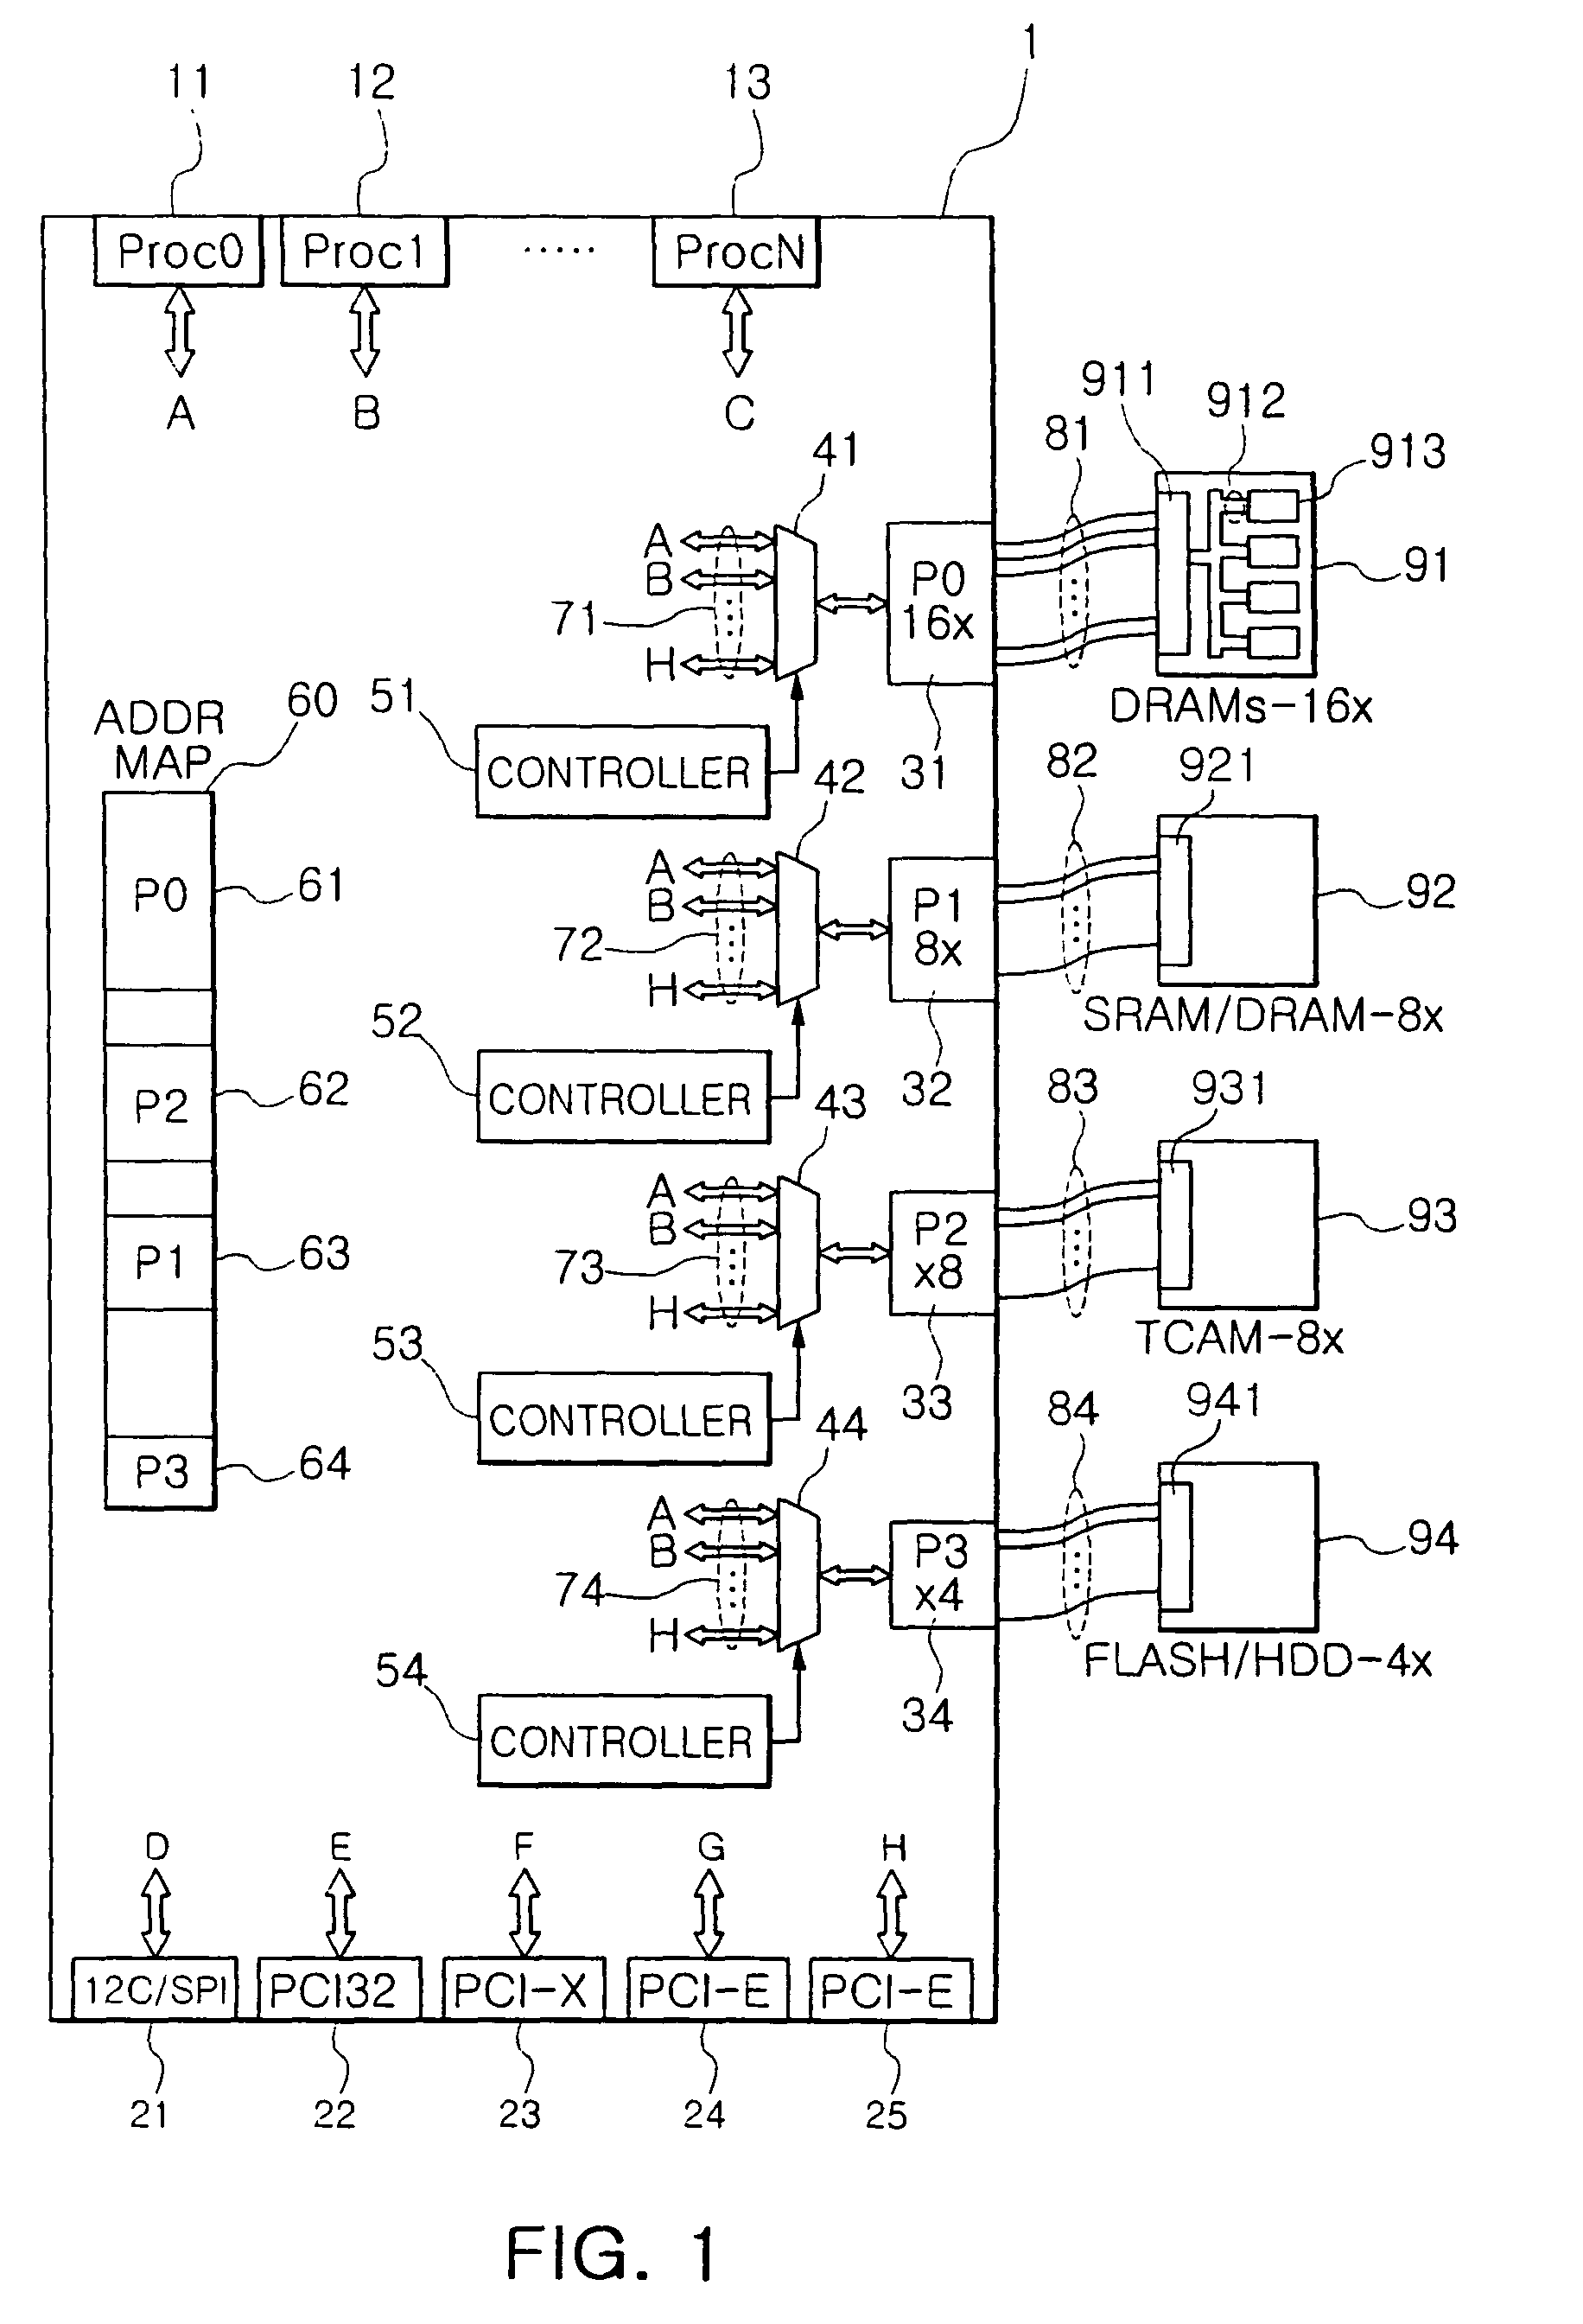 Memory switching control apparatus using open serial interface, operating method thereof, and data storage device therefor